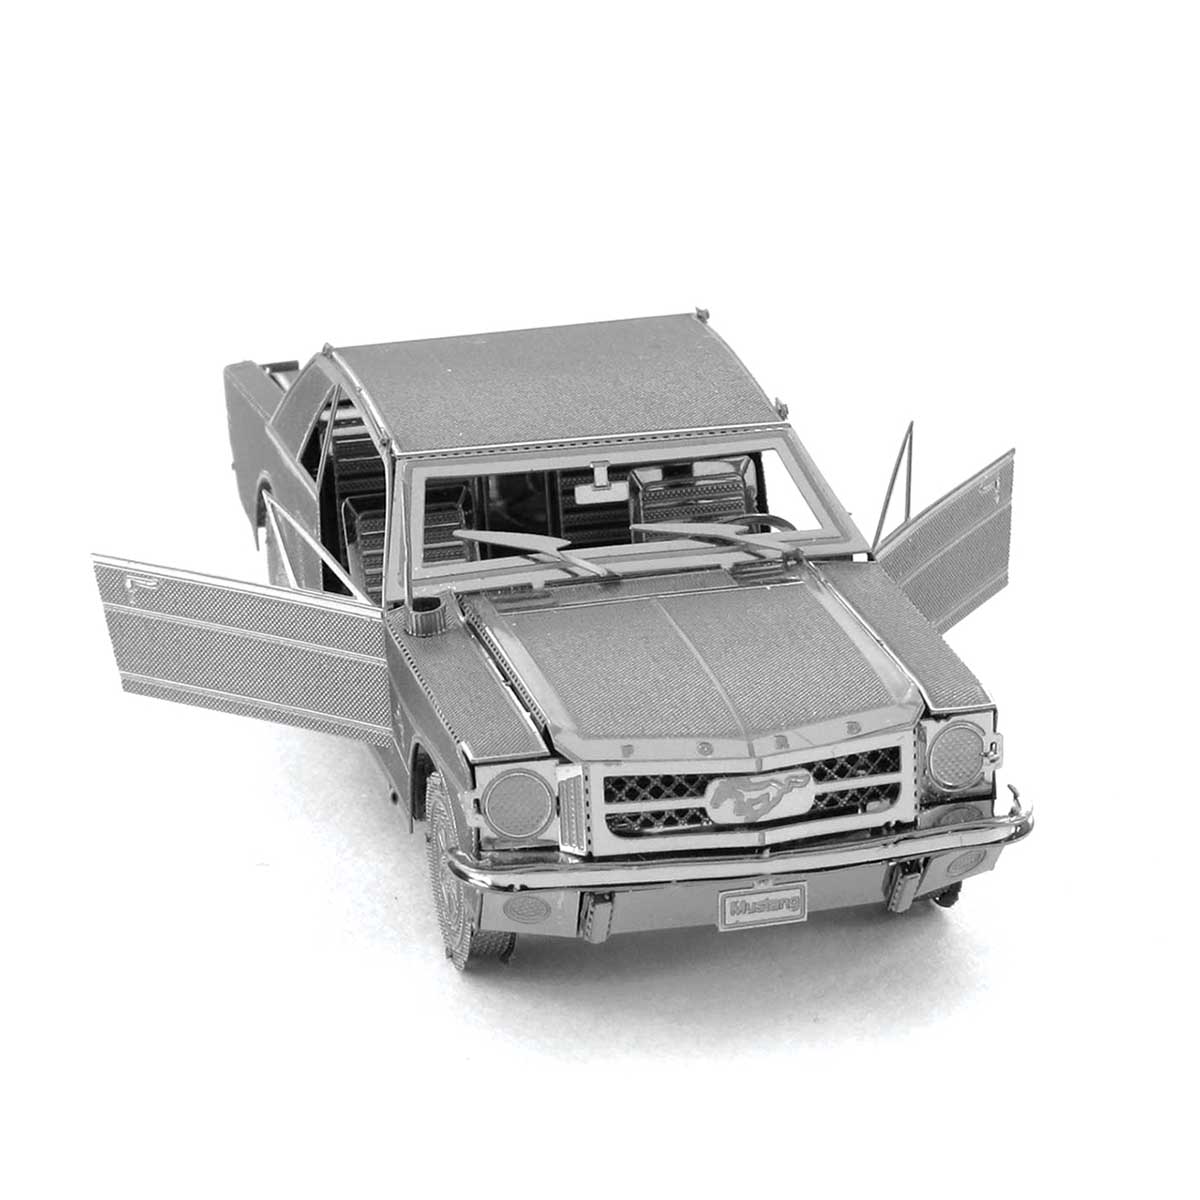 Ford 1965 Mustang Coupe Car Metal Puzzles